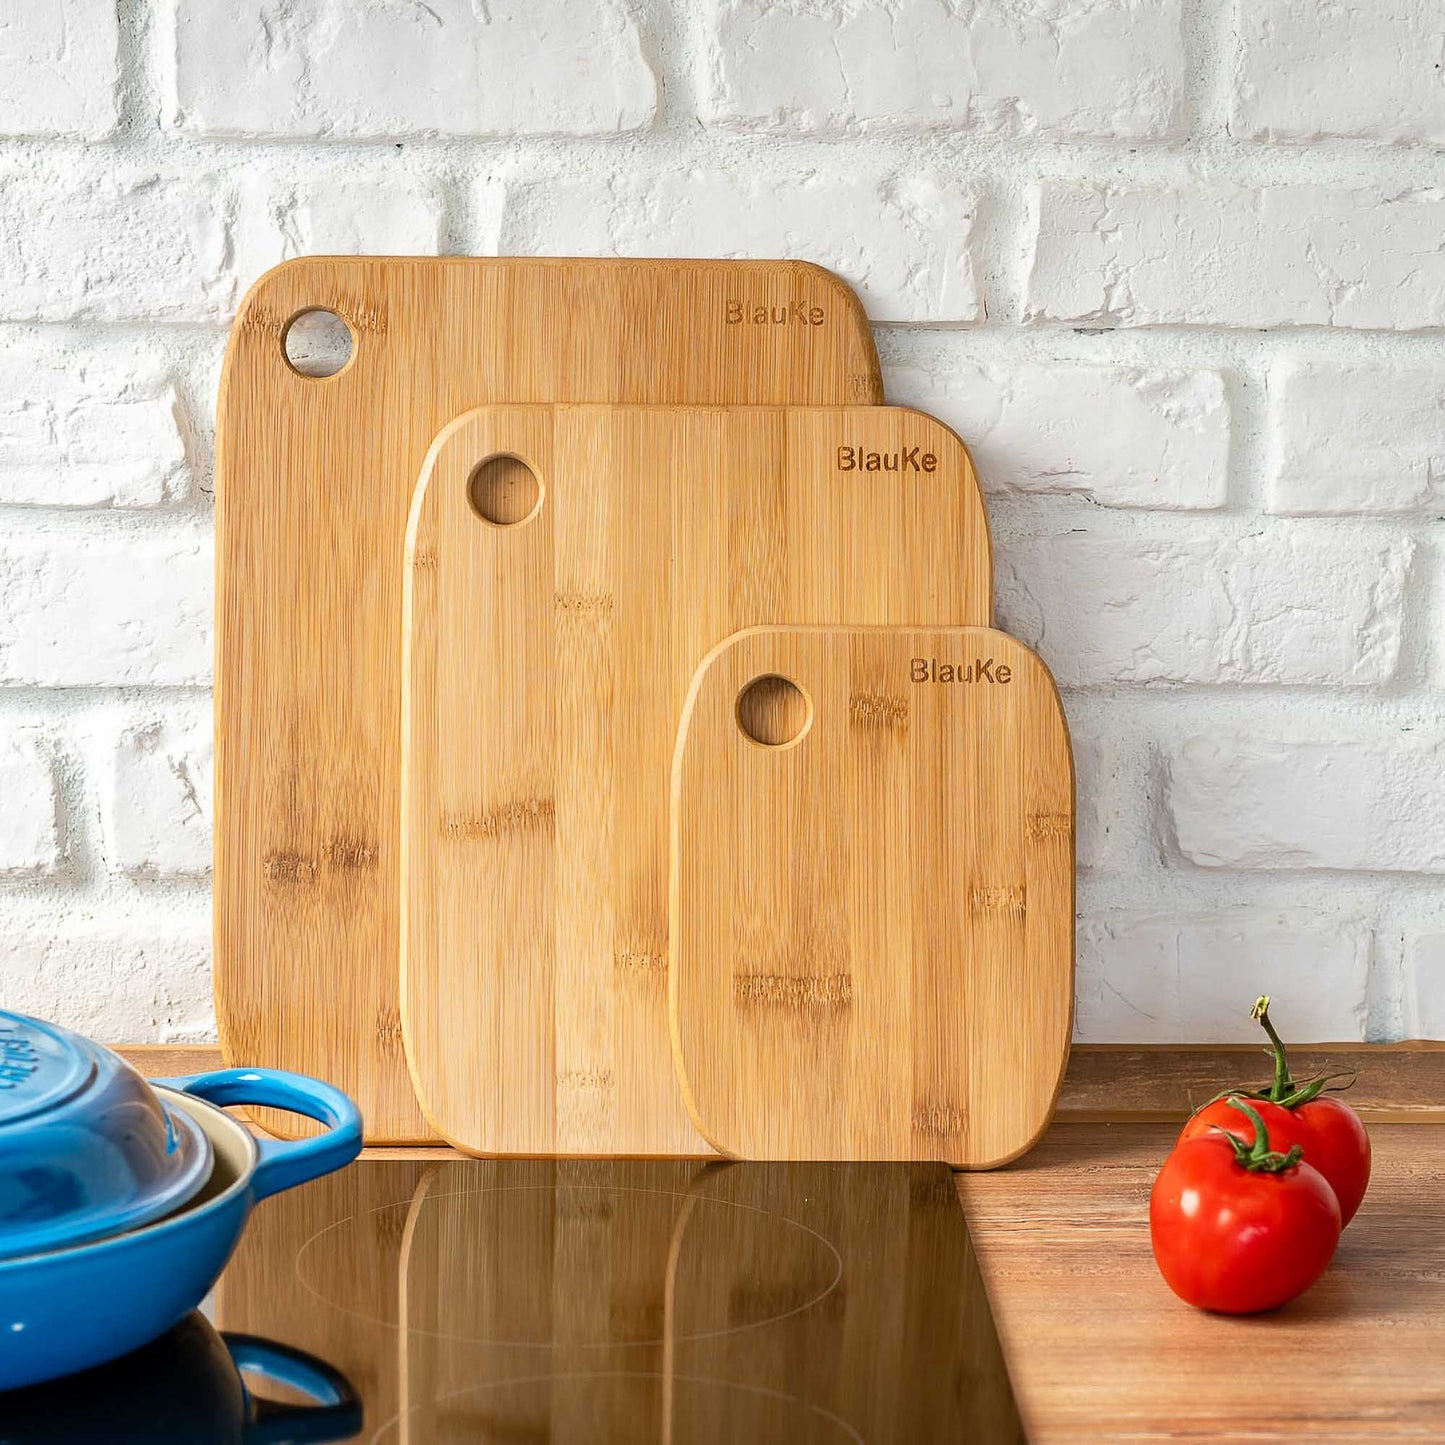 Wooden Cutting Boards for Kitchen - Bamboo Chopping Board Set of 3-8